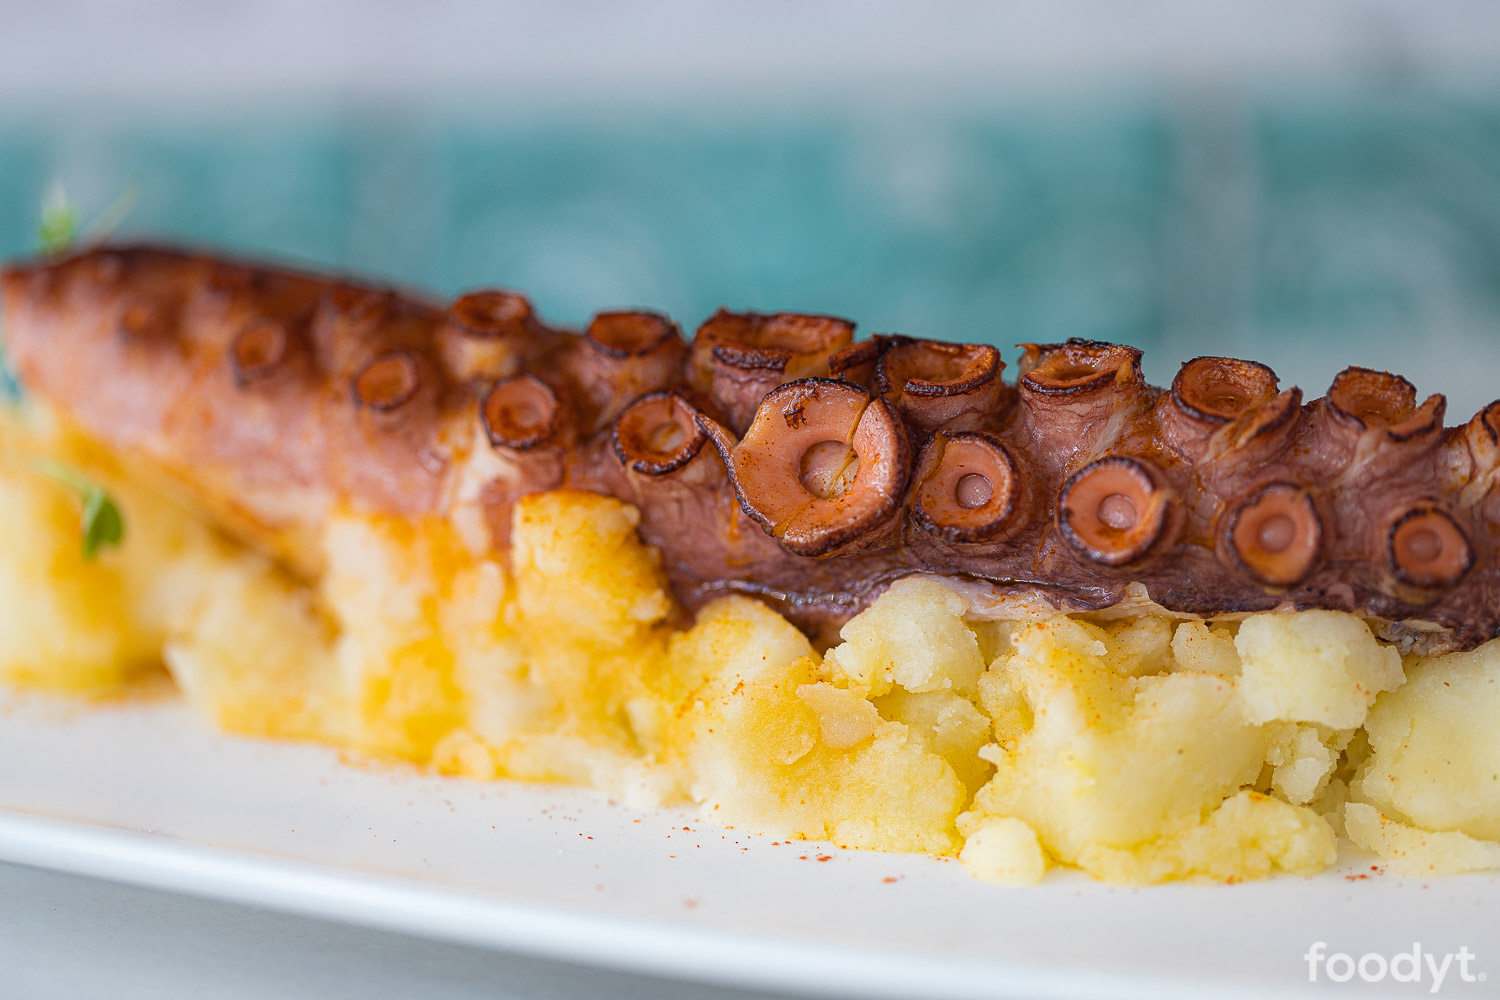 Grilled octopus on potato parmentier